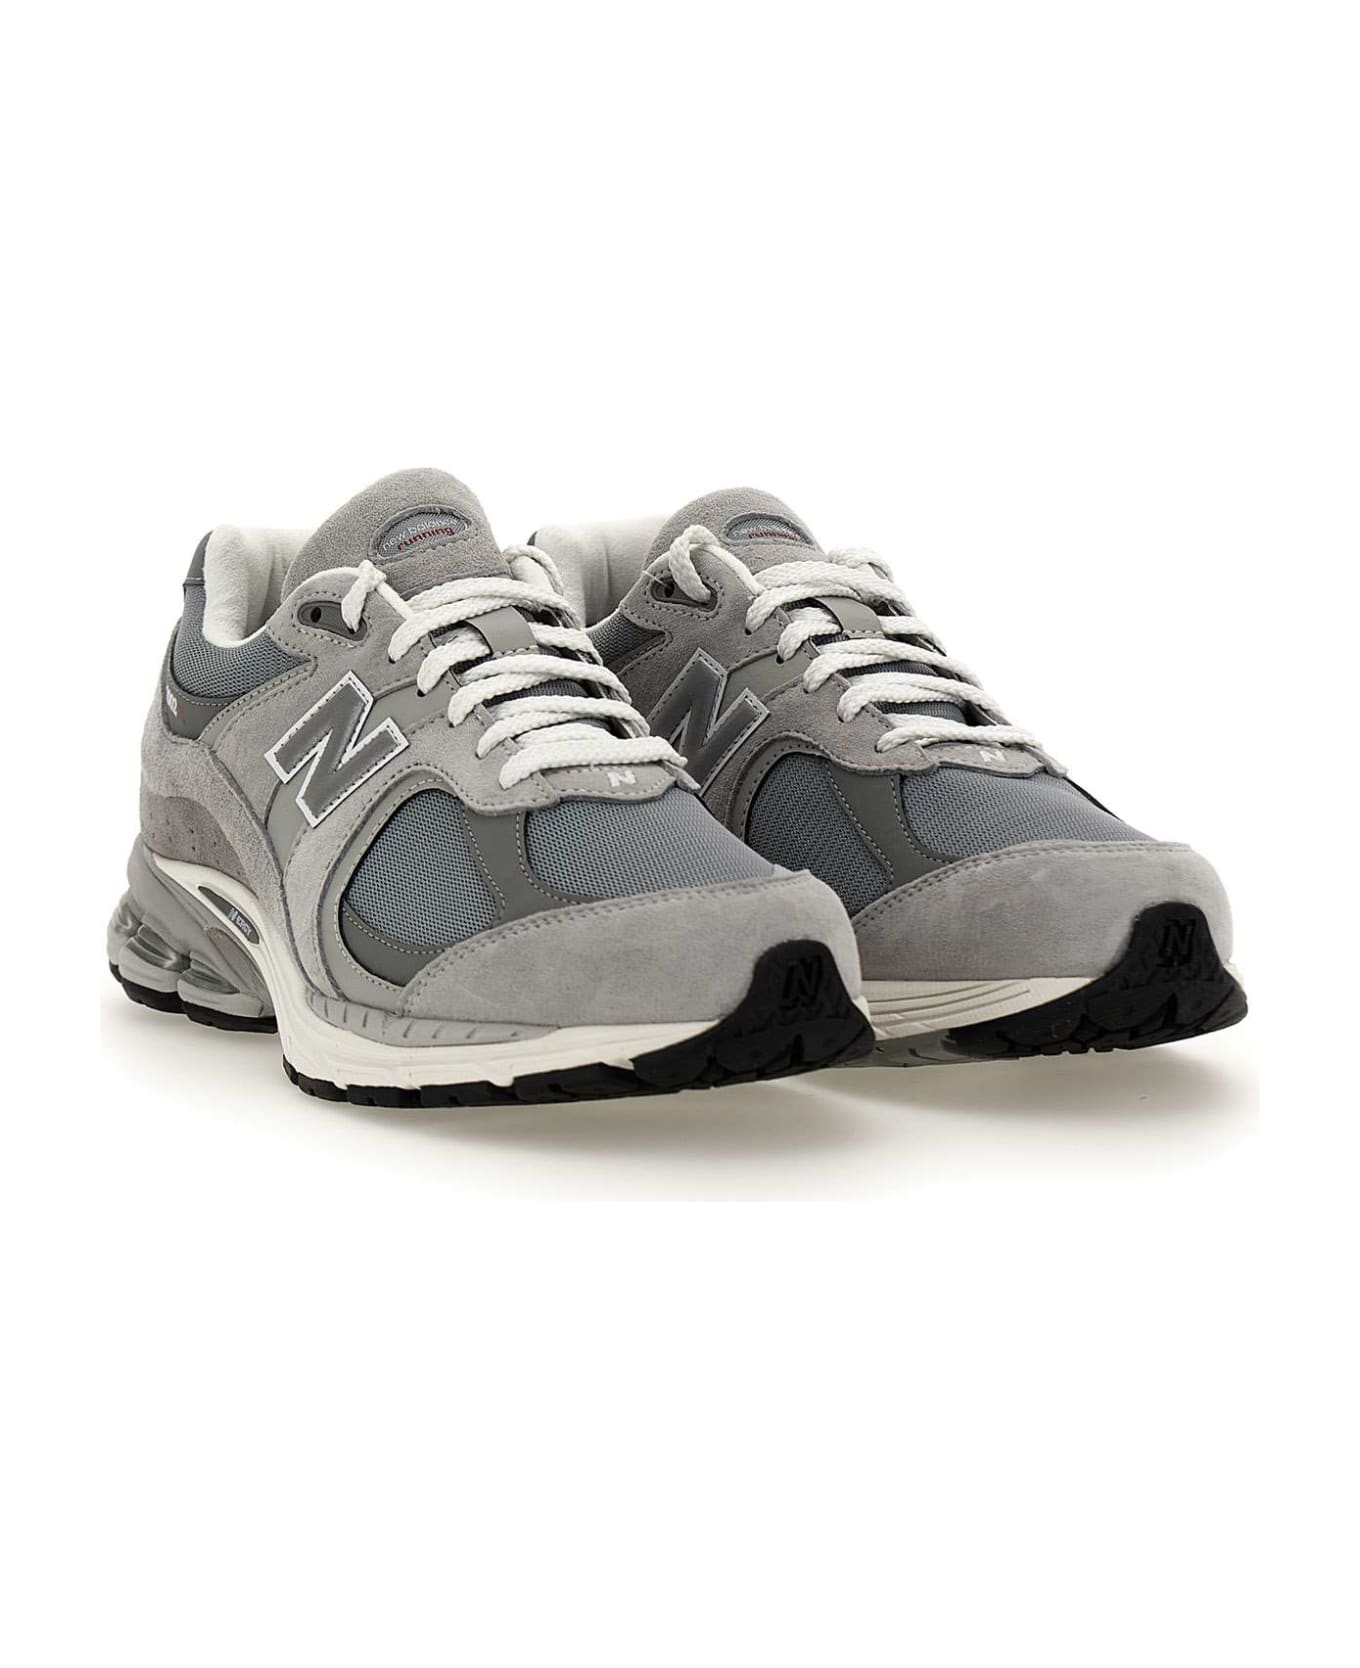 New Balance "2002rx" Sneakers - GREY